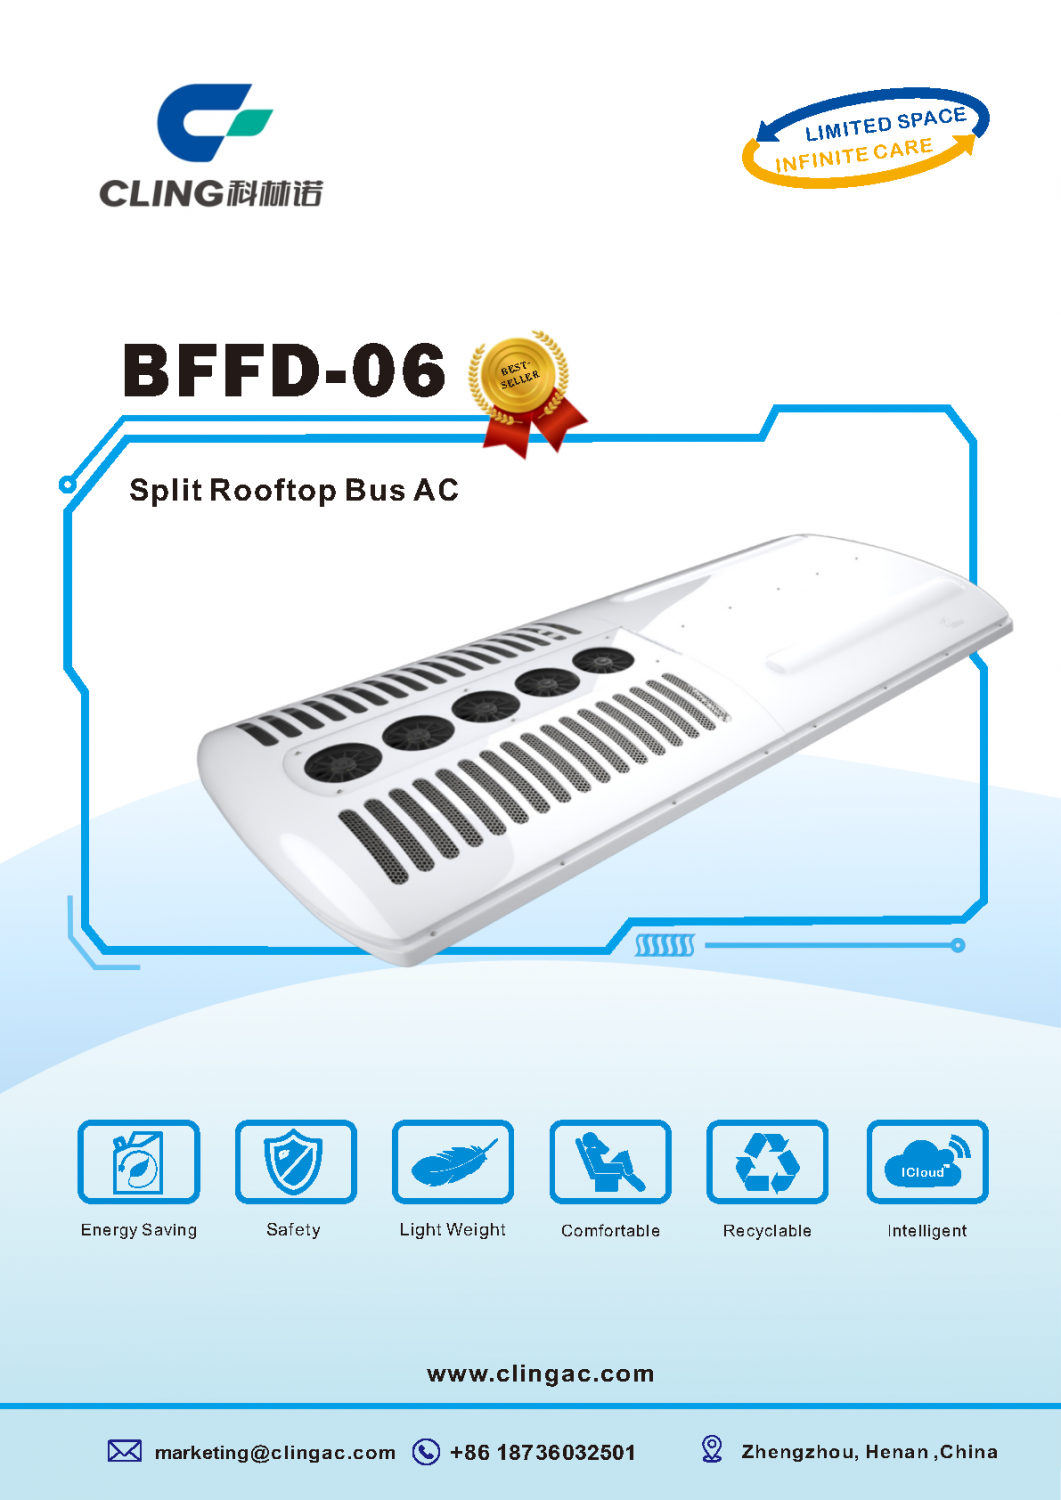 Cling bus air conditioner BFFD-06